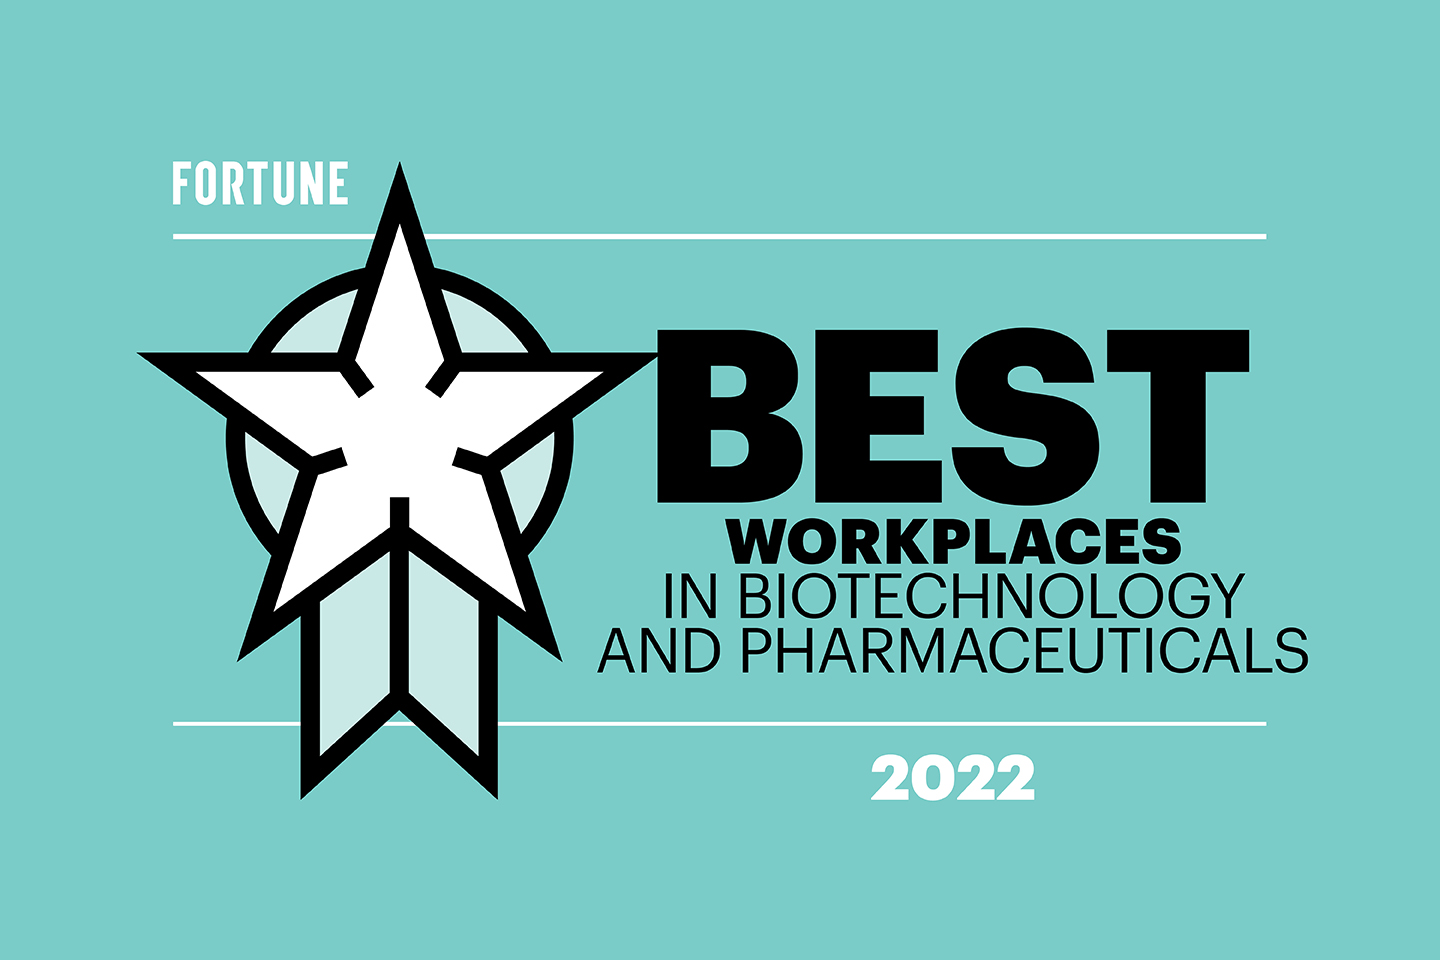 10 Best Large Workplaces in Biotechnology and Pharmaceuticals